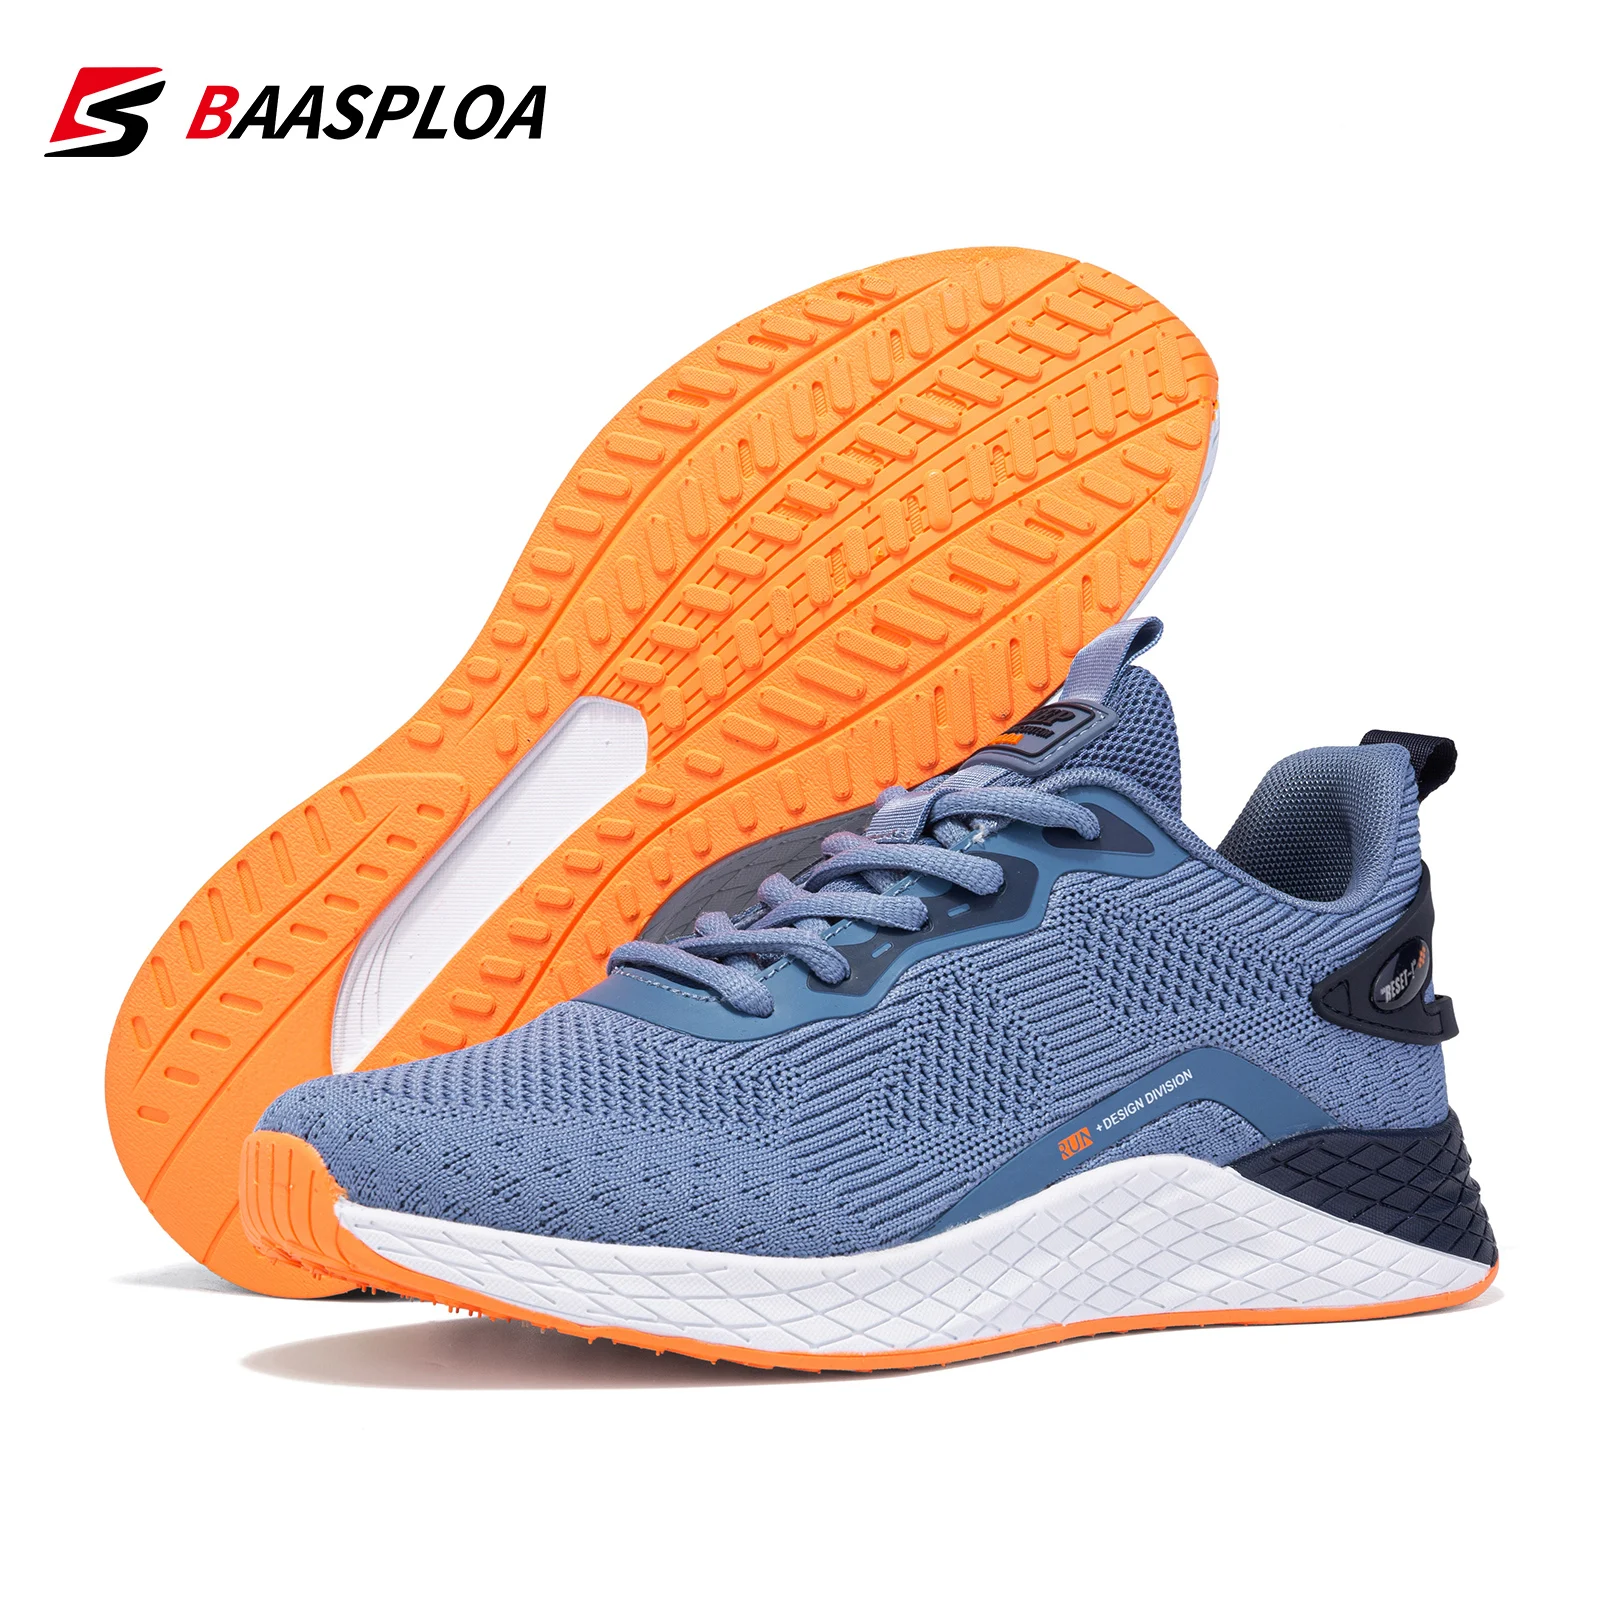 

Baasploa Men Casual Sneakers High Quality Breathable Lightweight Running Shoes Brand Comfort Casual Walking Shoes Male Non-Slip